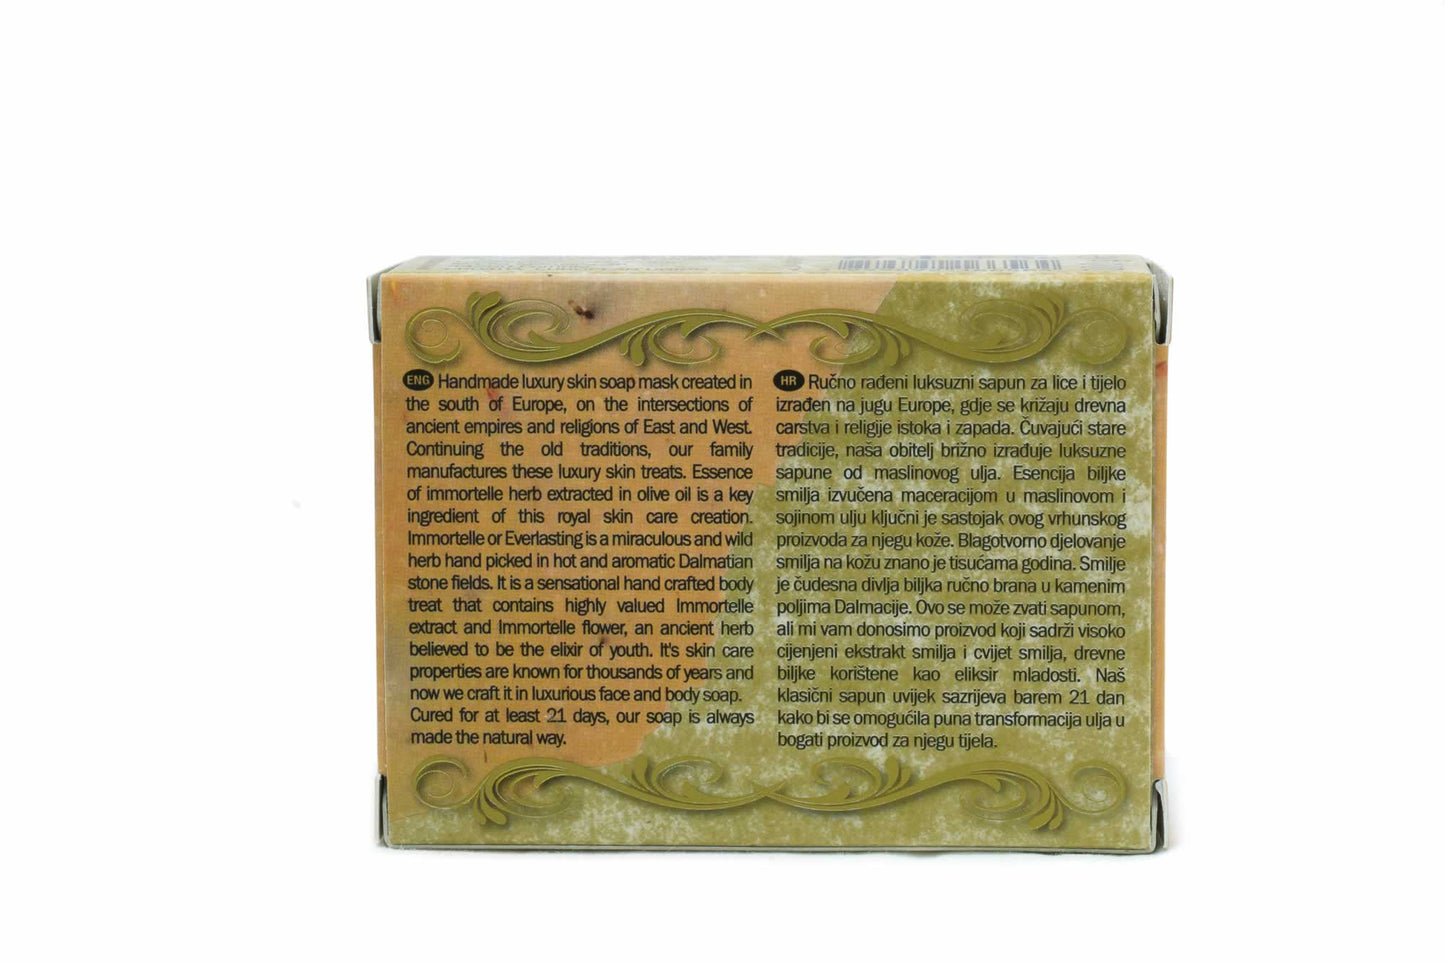 Regént immortelle soap - with immortelle macerate for skin renewal